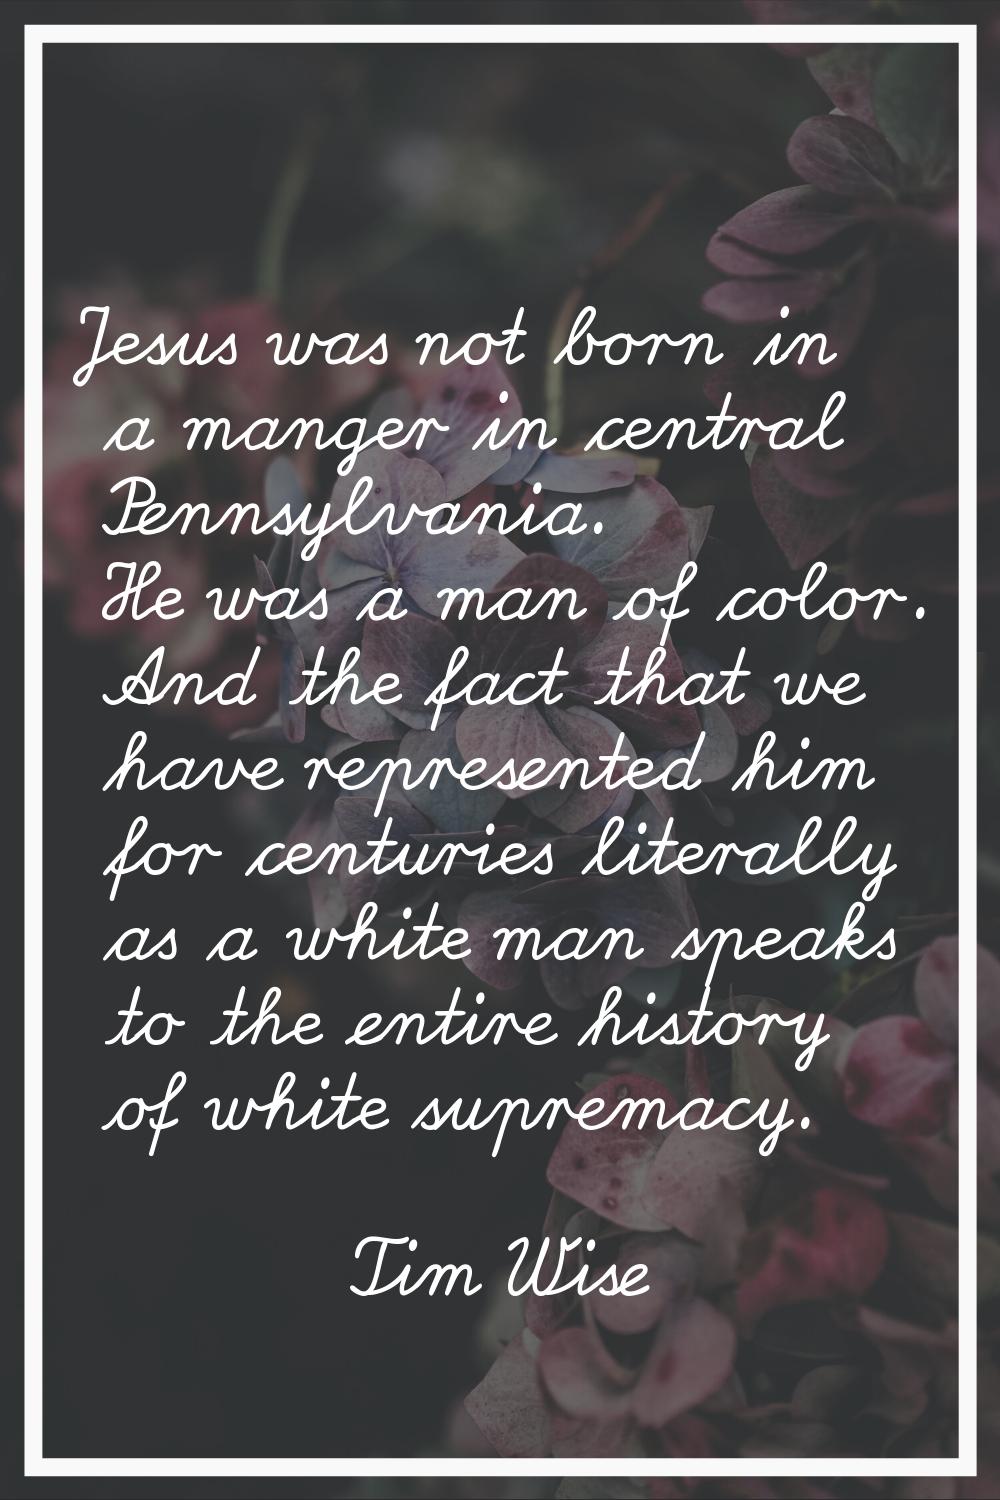 Jesus was not born in a manger in central Pennsylvania. He was a man of color. And the fact that we